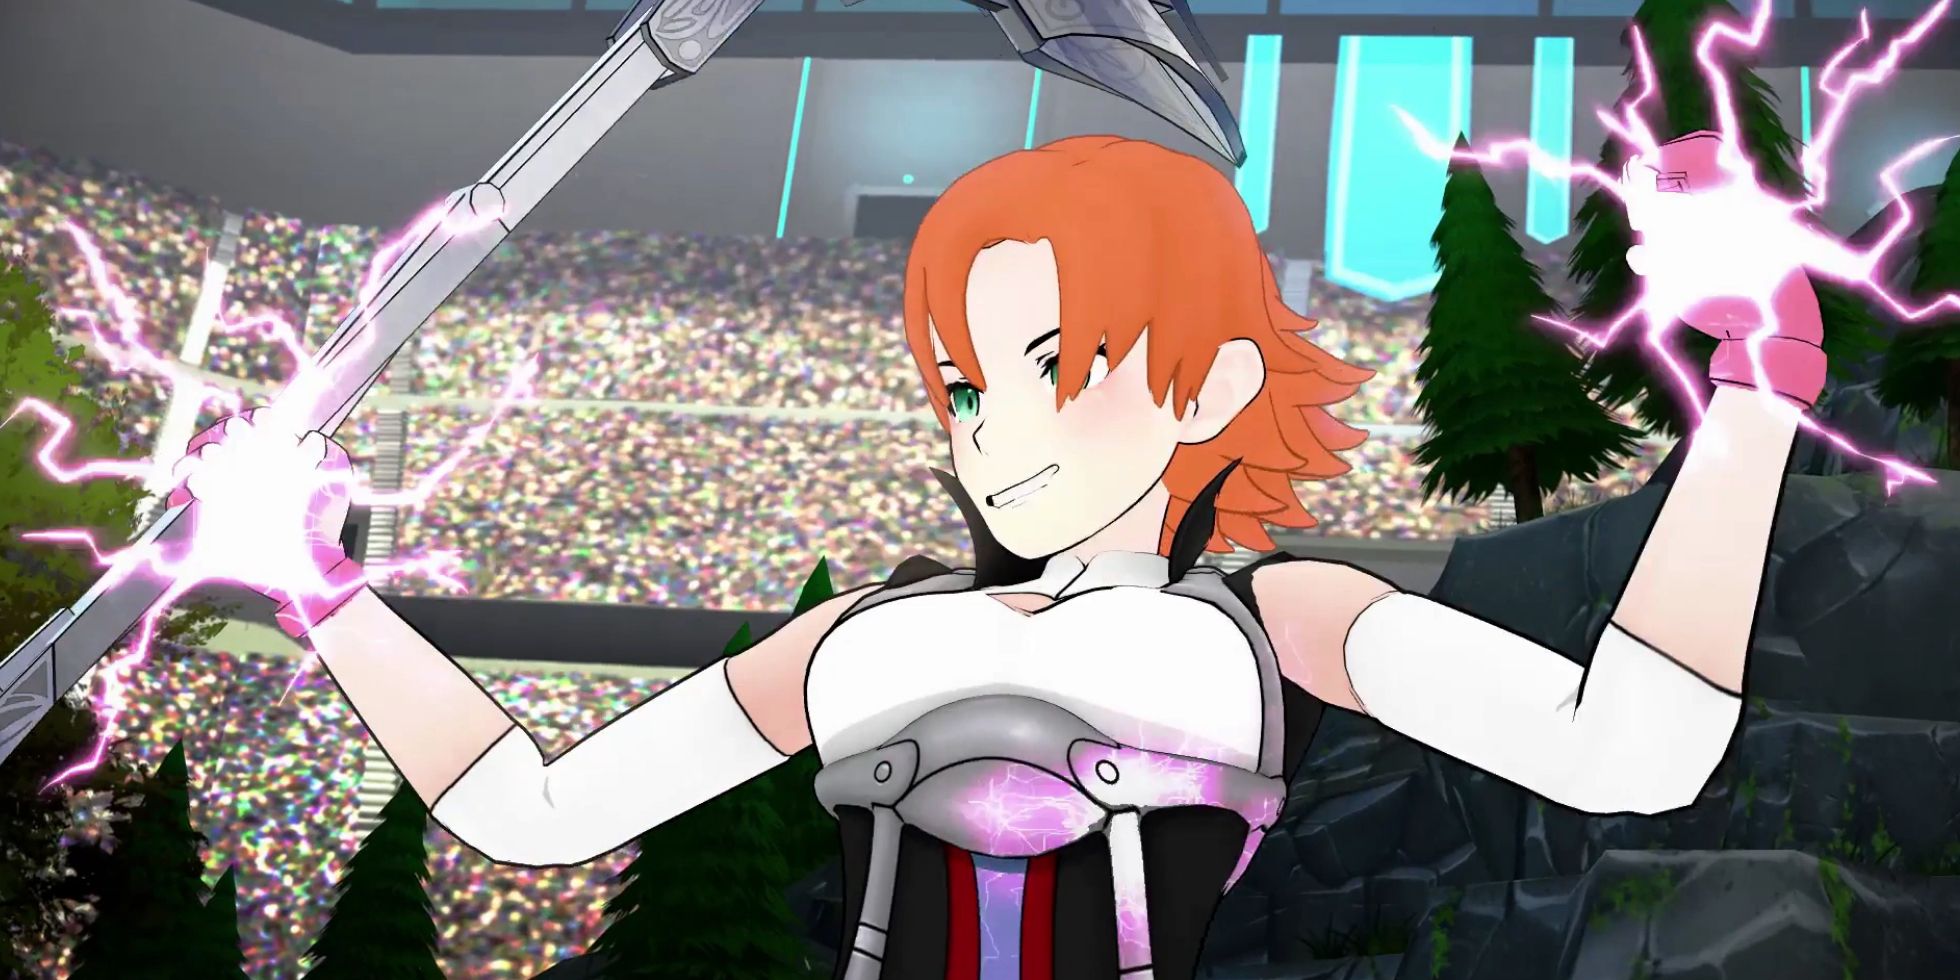 Nora Using Her High Voltage Semblance During The Vytal Festival In RWBY